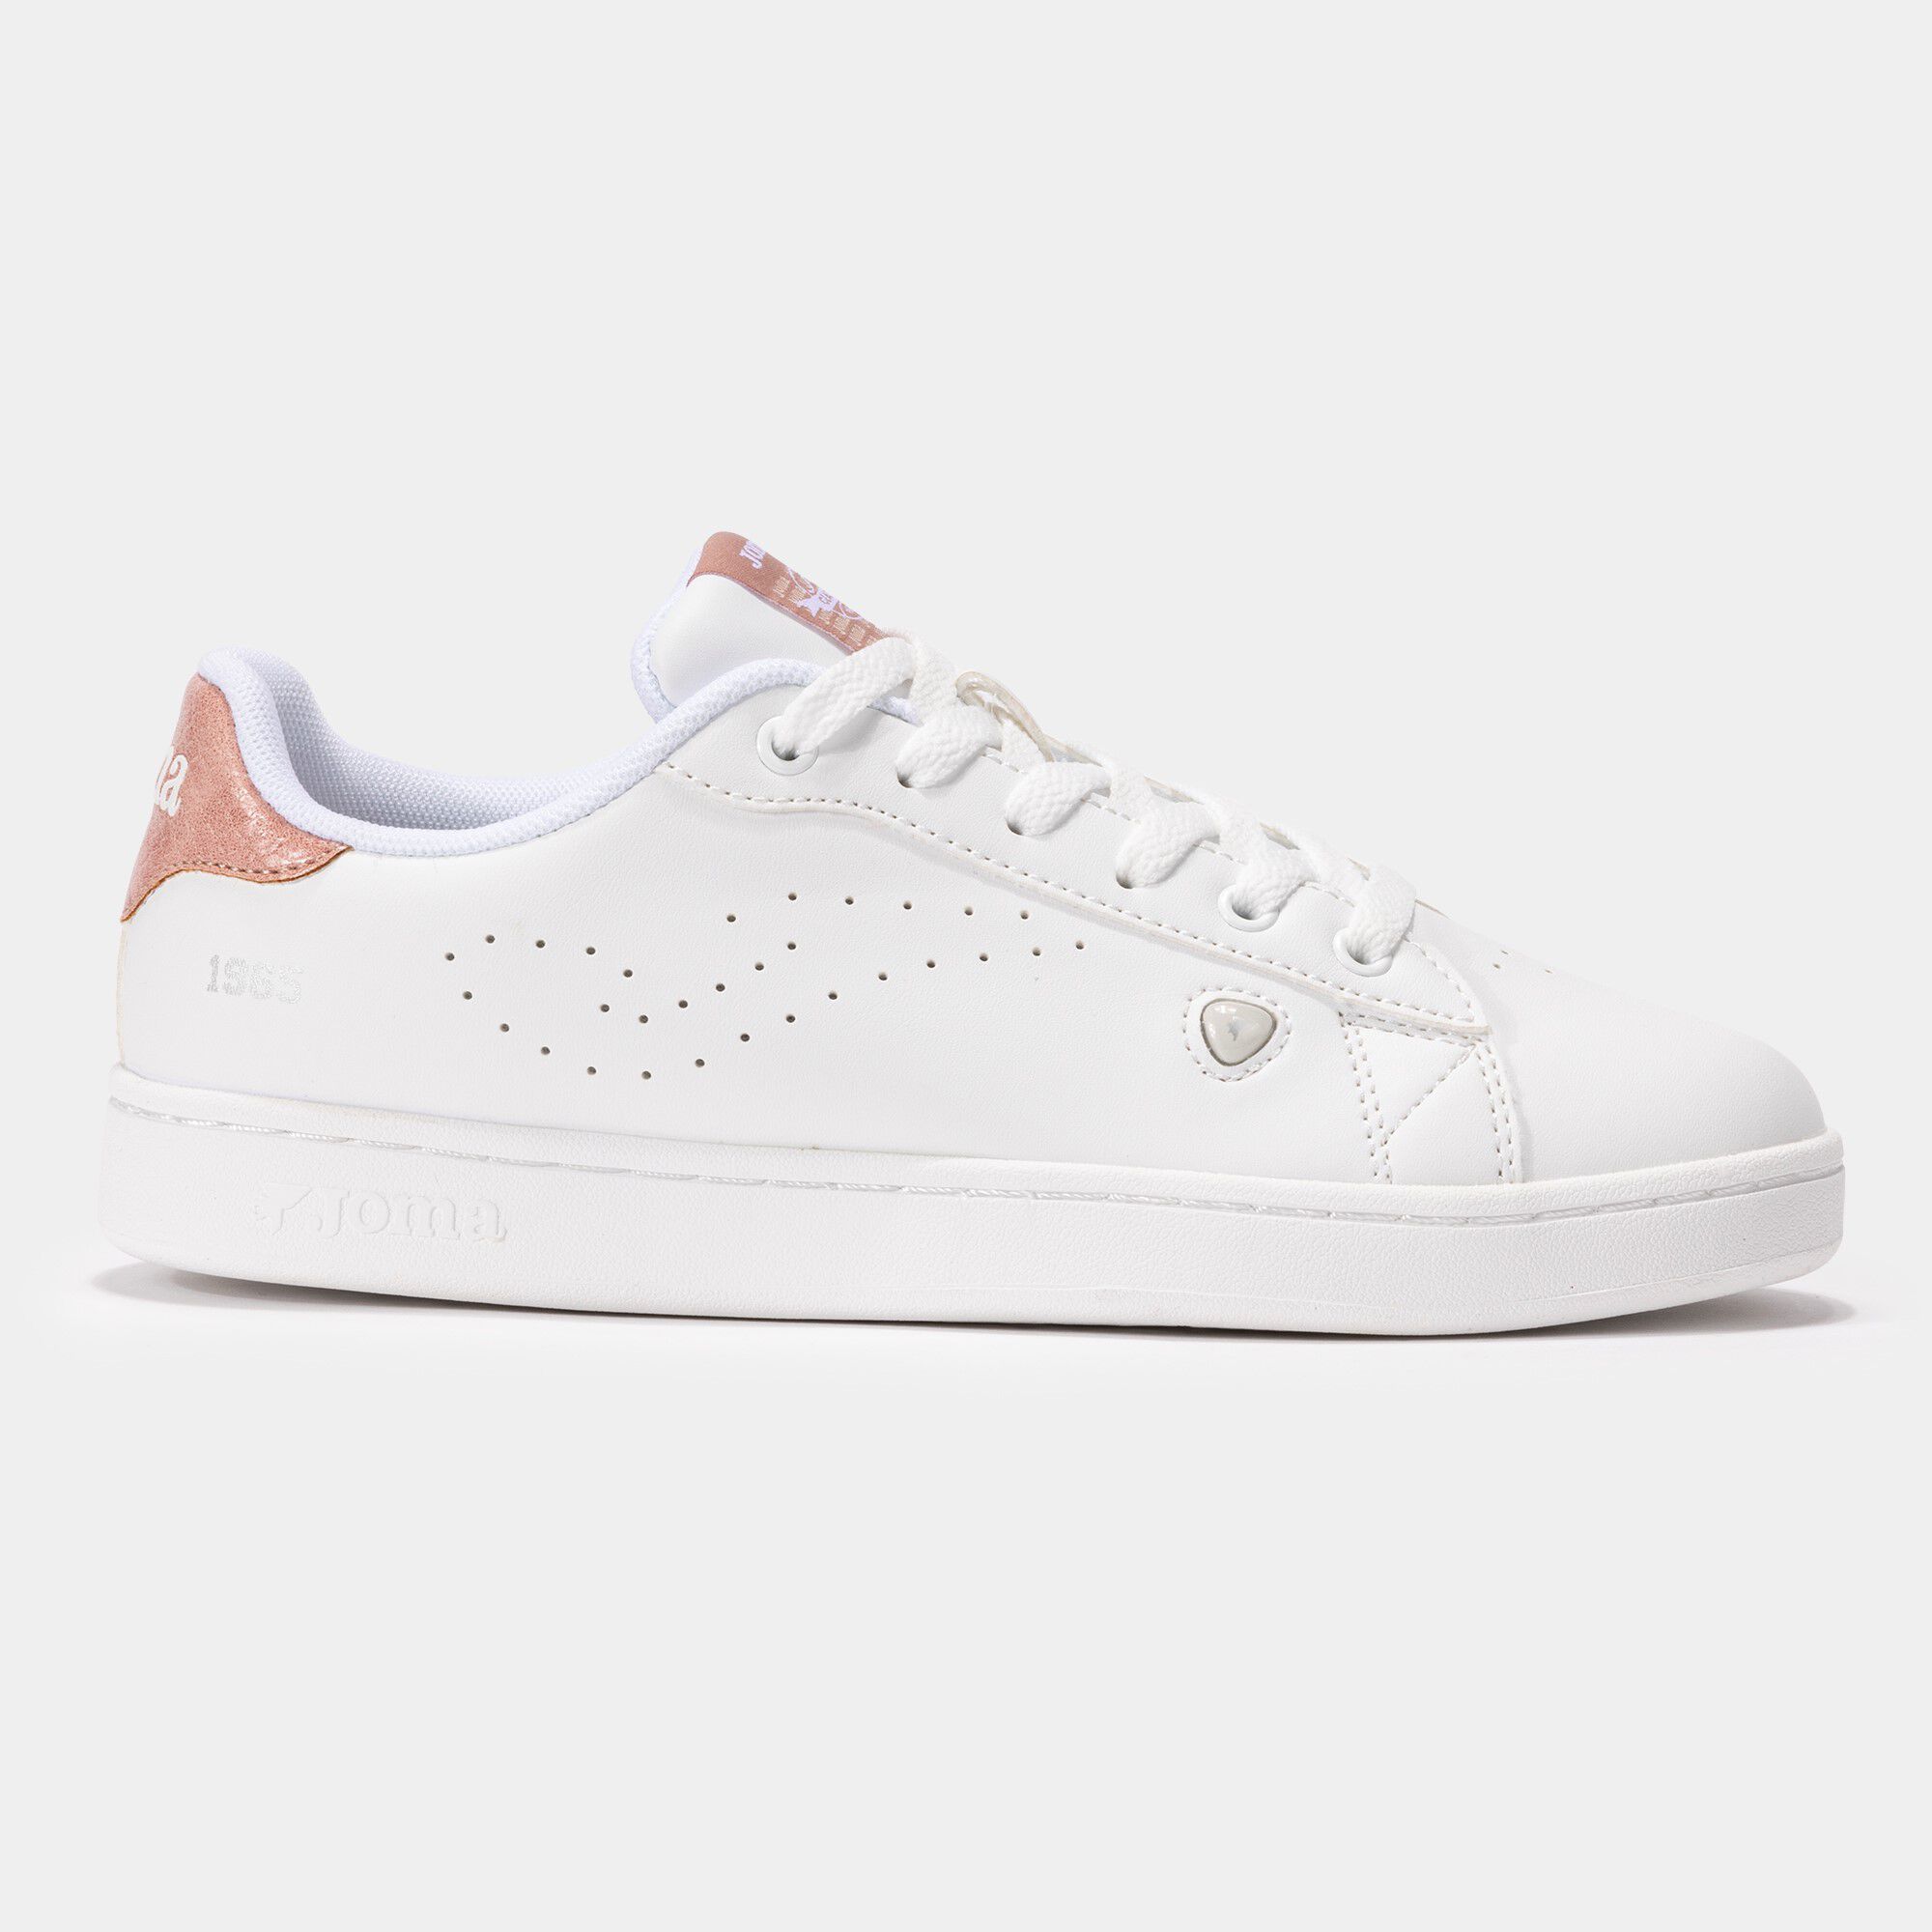 Chaussures casual Classic Lady 24 femme blanc rose